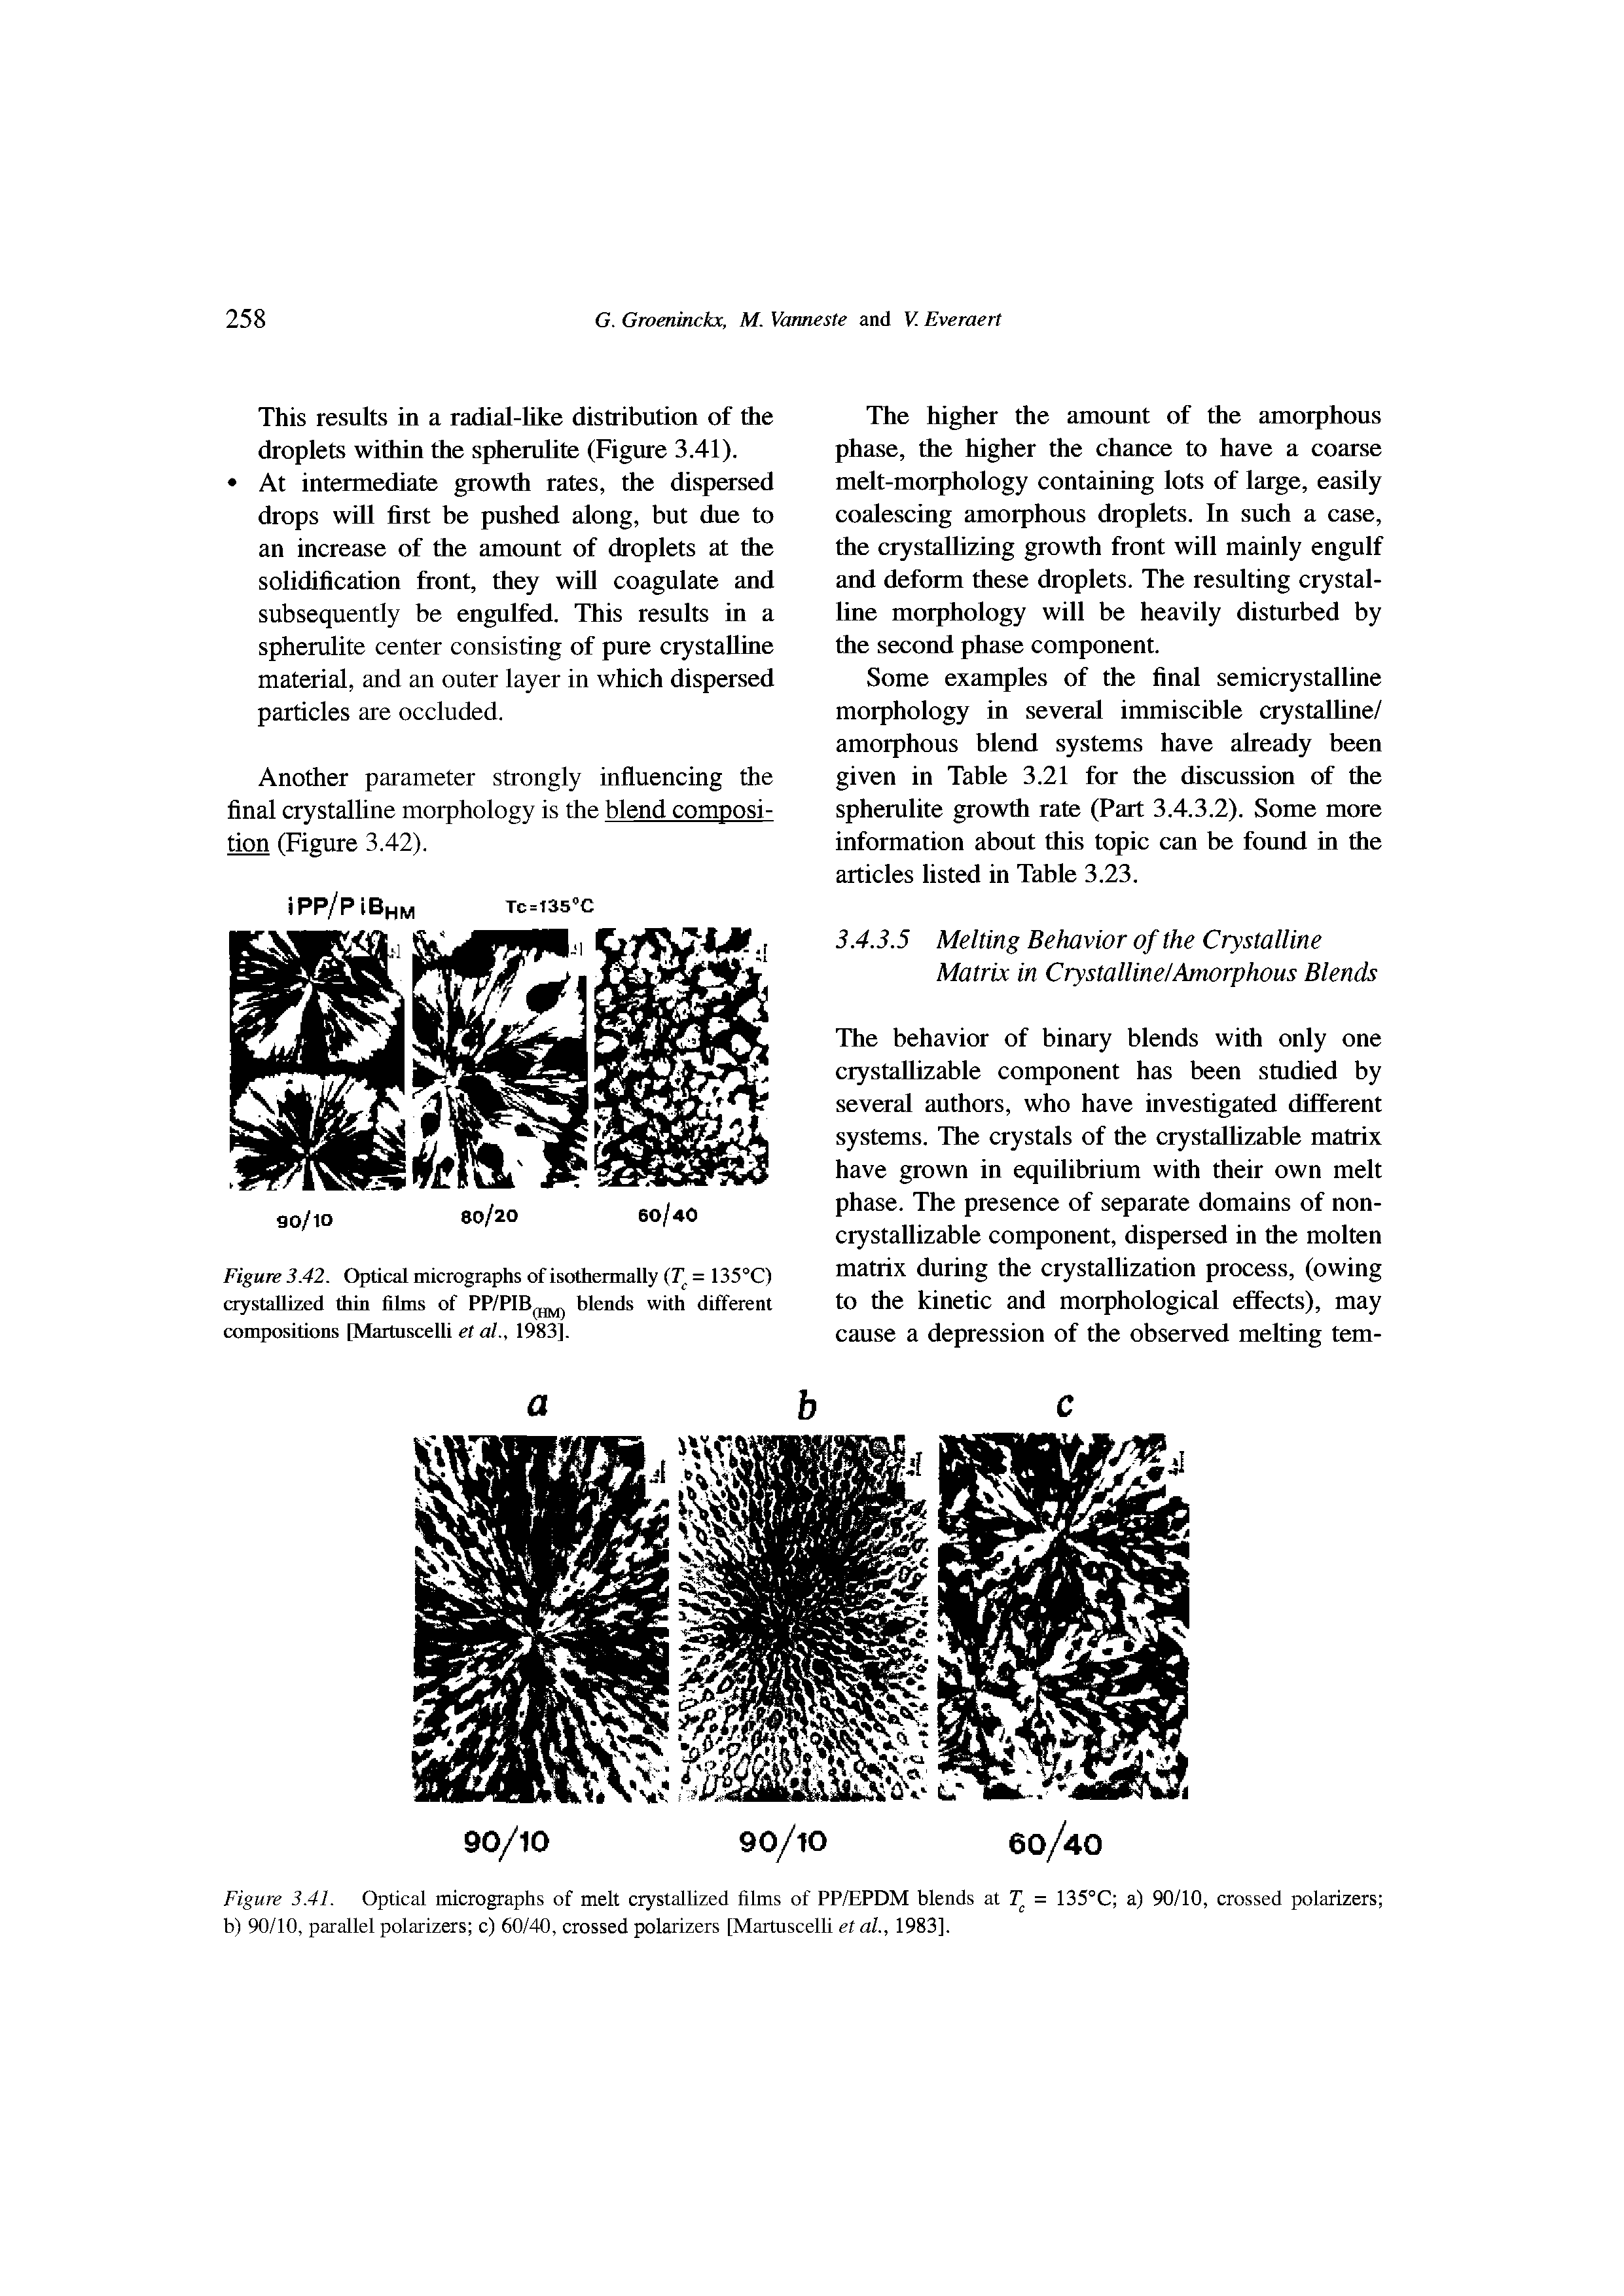 Figure 3.42. Optical micrographs of isothennally T = 135°C) crystallized thin films of PP/PlB jj j blends with different compositions [Martuscelli et at., 1983],...